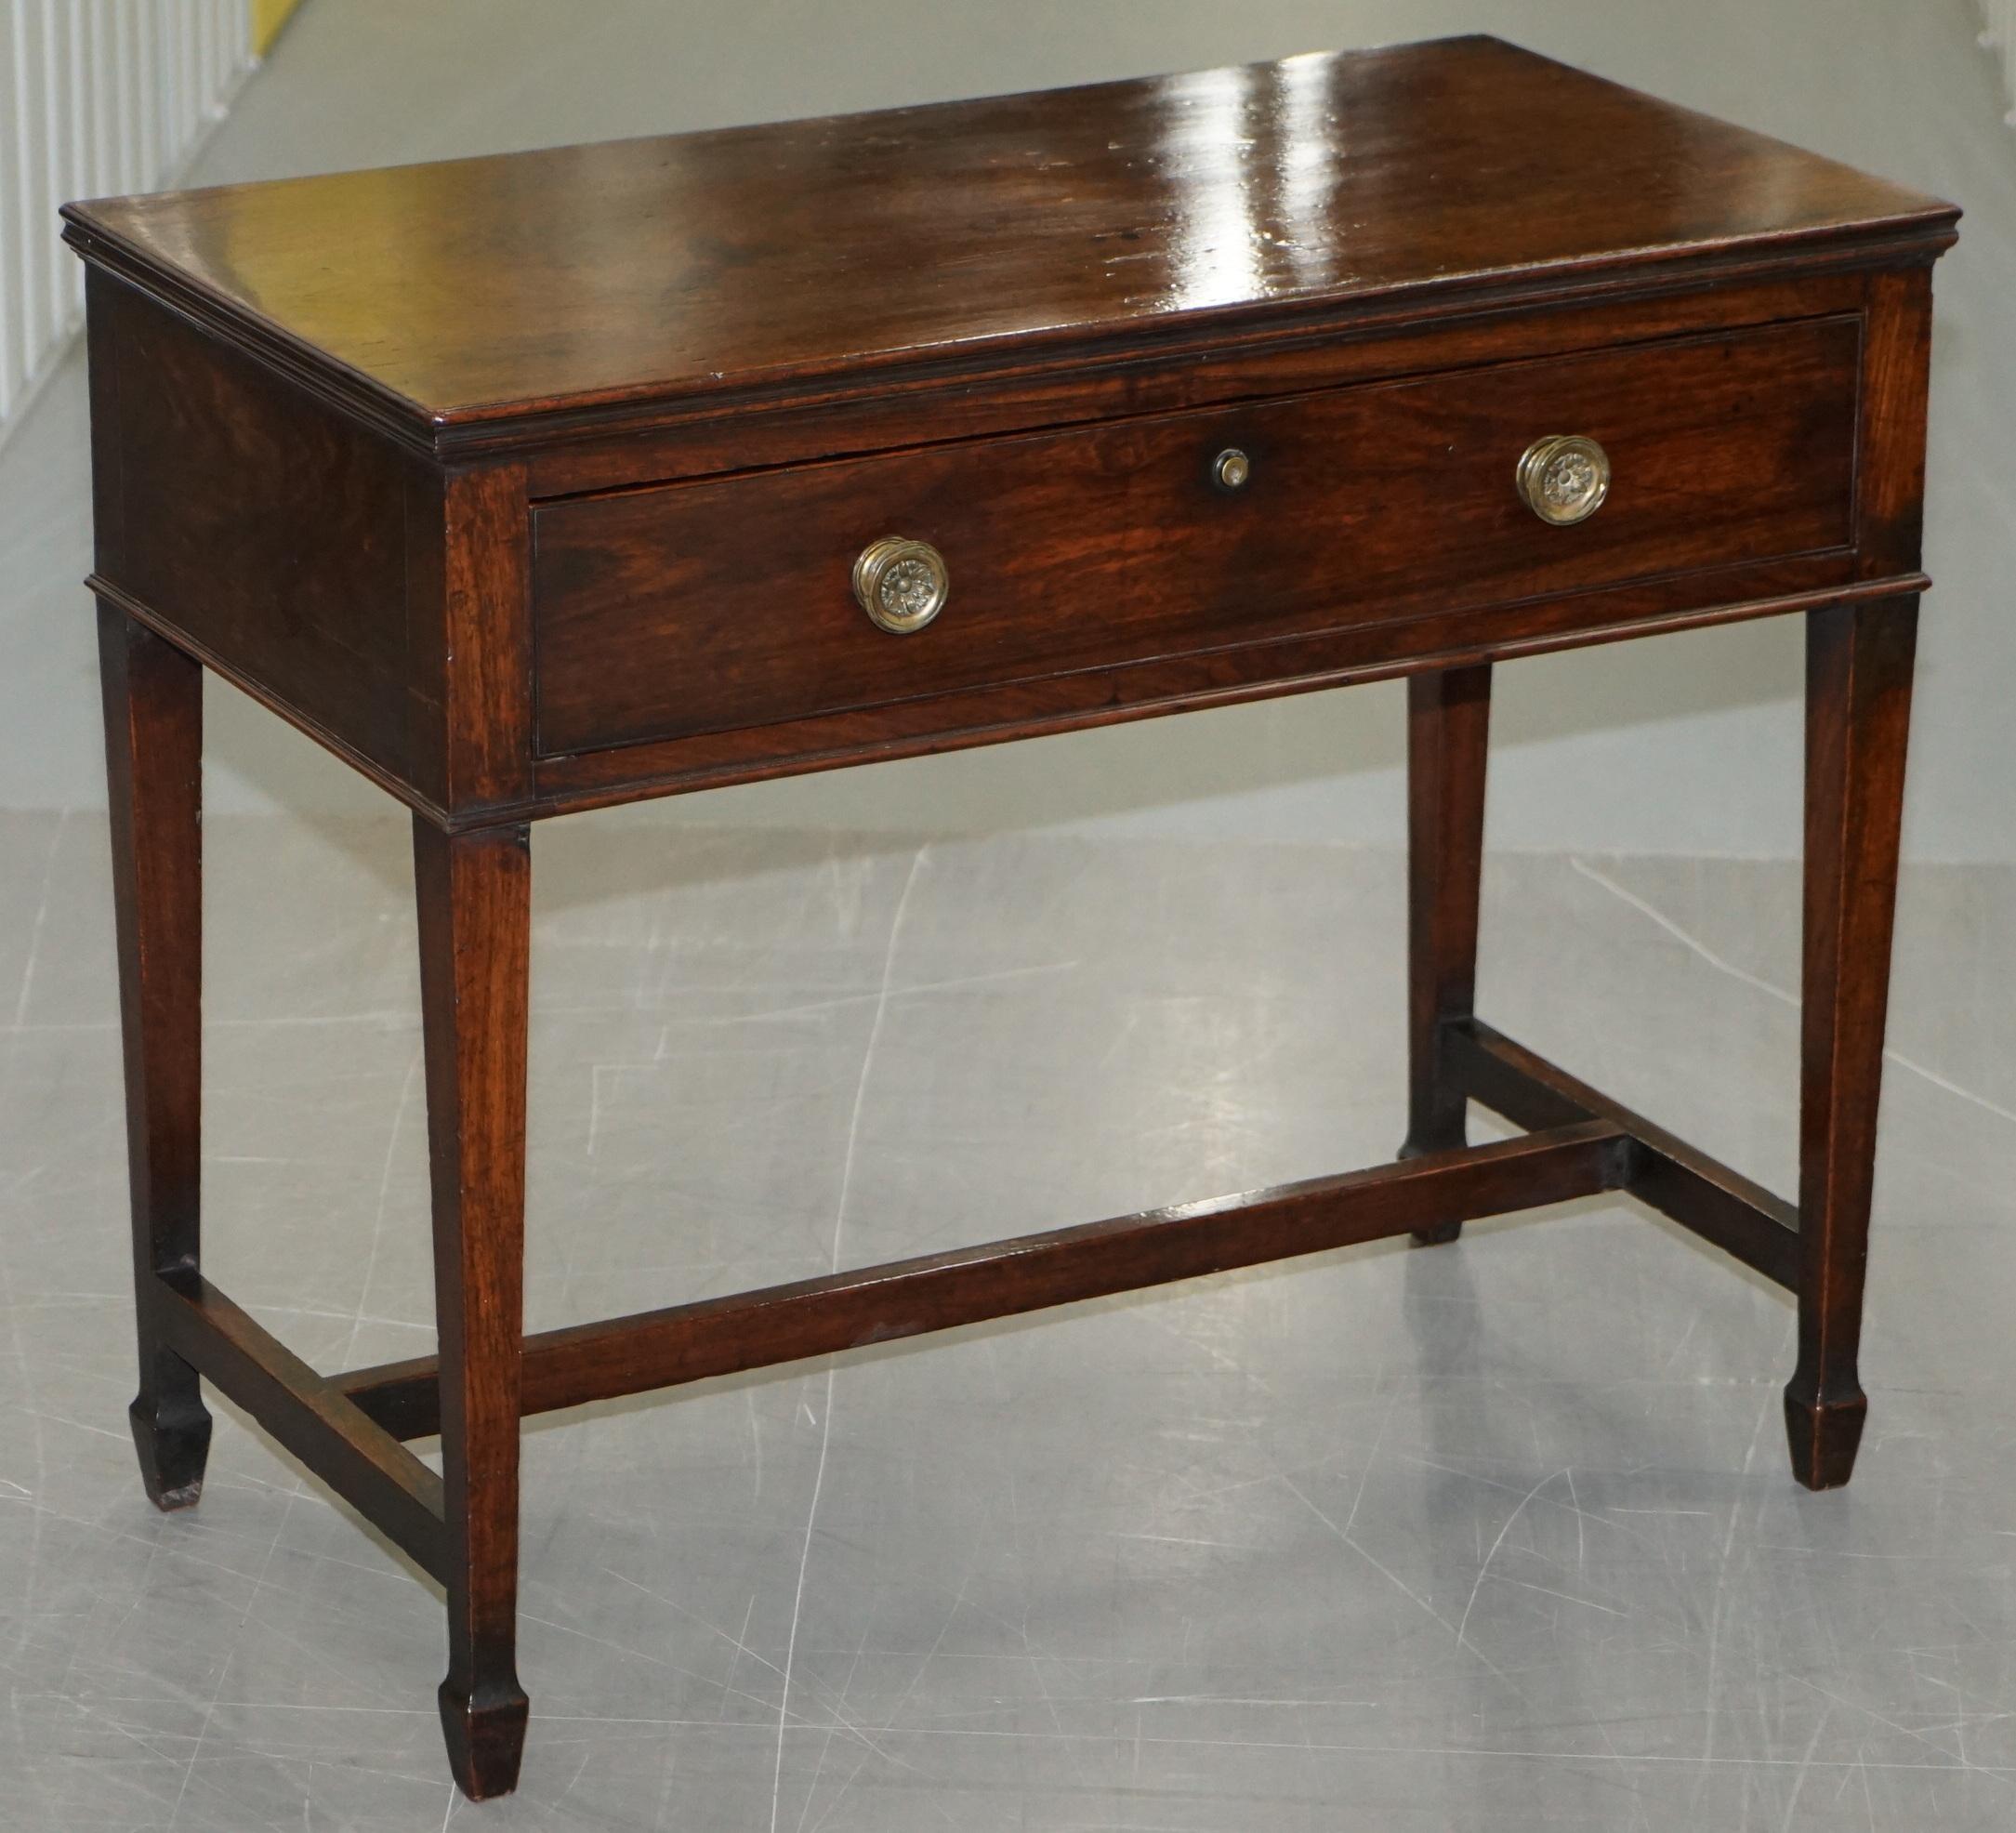 We are delighted to offer for sale this very rare circa 1790 George III Library writing desk secrataire by Gillows of Lancaster and London

A rare find, looking through Gillows of Lancaster and London 1730-1840 I've found a selection of similar